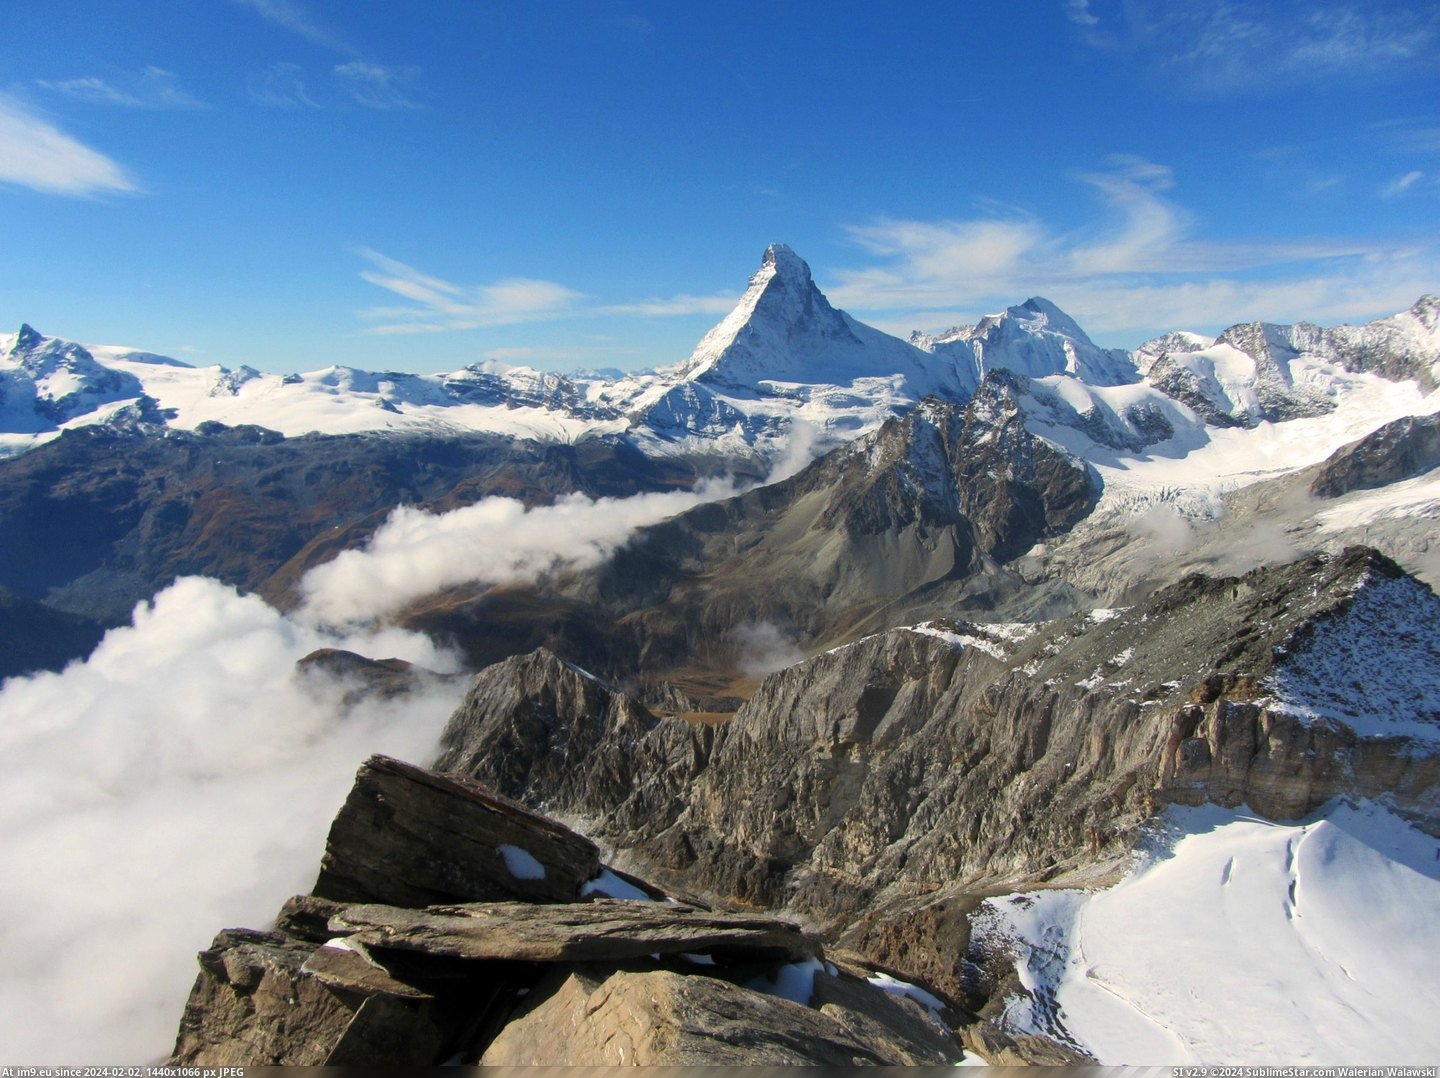 #Famous #Alps #Matterhorn #Peak [Earthporn] Looking over to the Matterhorn, most famous peak of the alps [2783x2074][OC] Pic. (Bild von album My r/EARTHPORN favs))